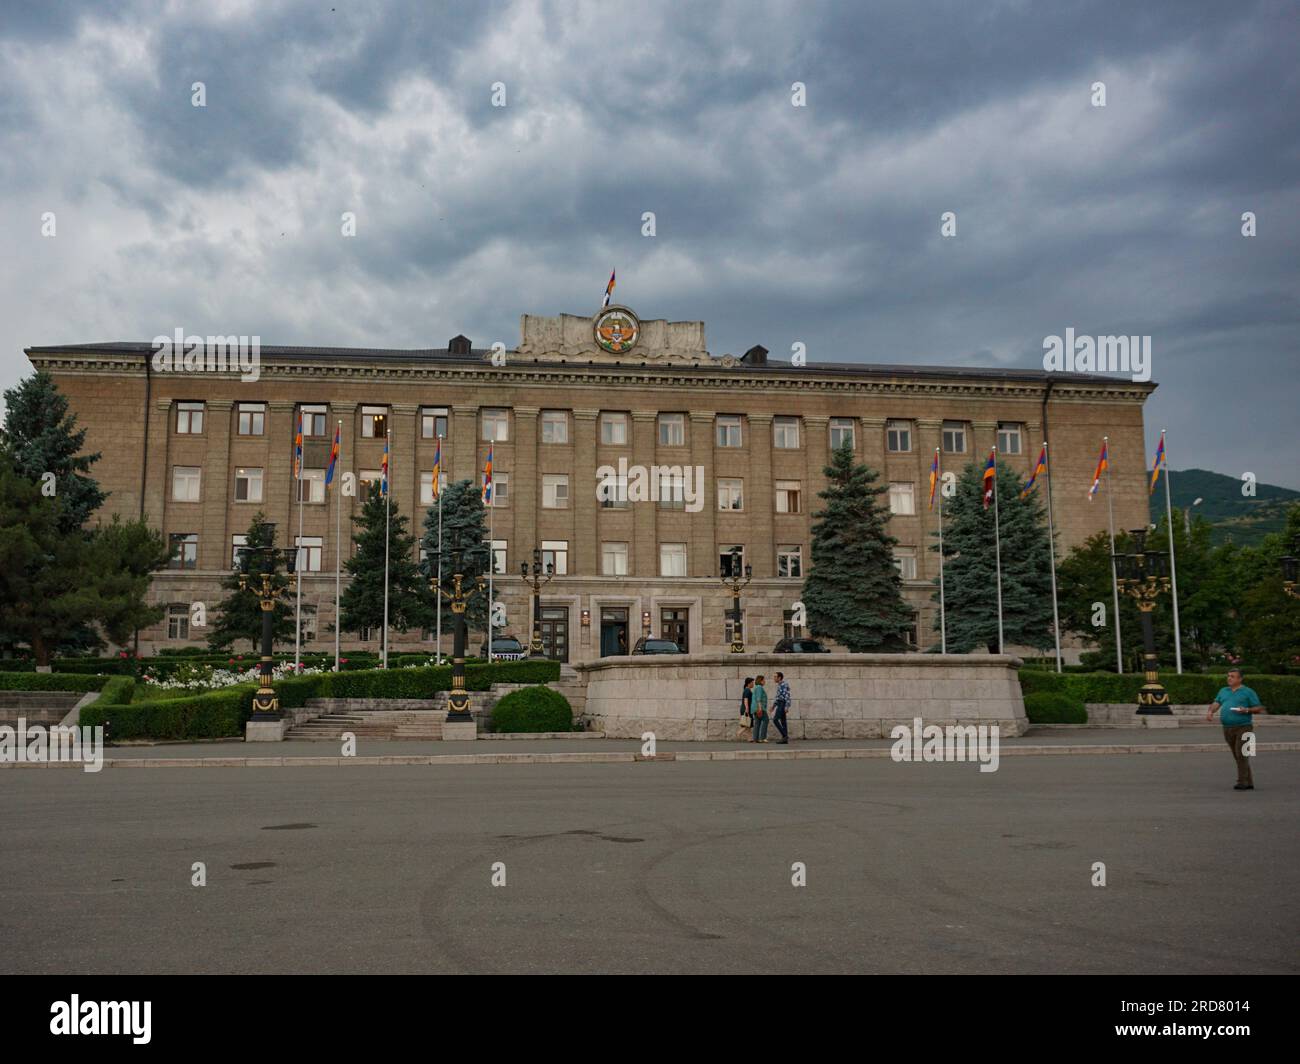 The exterior of Karabakh's Presidential Building at the Renaissance Square of Stepanakert, Nagorno-Karabakh. The unrecognised yet de facto independent country in South Caucasus, Nagorno-Karabakh (also known as Artsakh) has been in the longest-running territorial dispute between Azerbaijan and Armenia in post-Soviet Eurasia since the collapse of Soviet Union. It is mainly populated by ethnic Armenians. Stock Photo